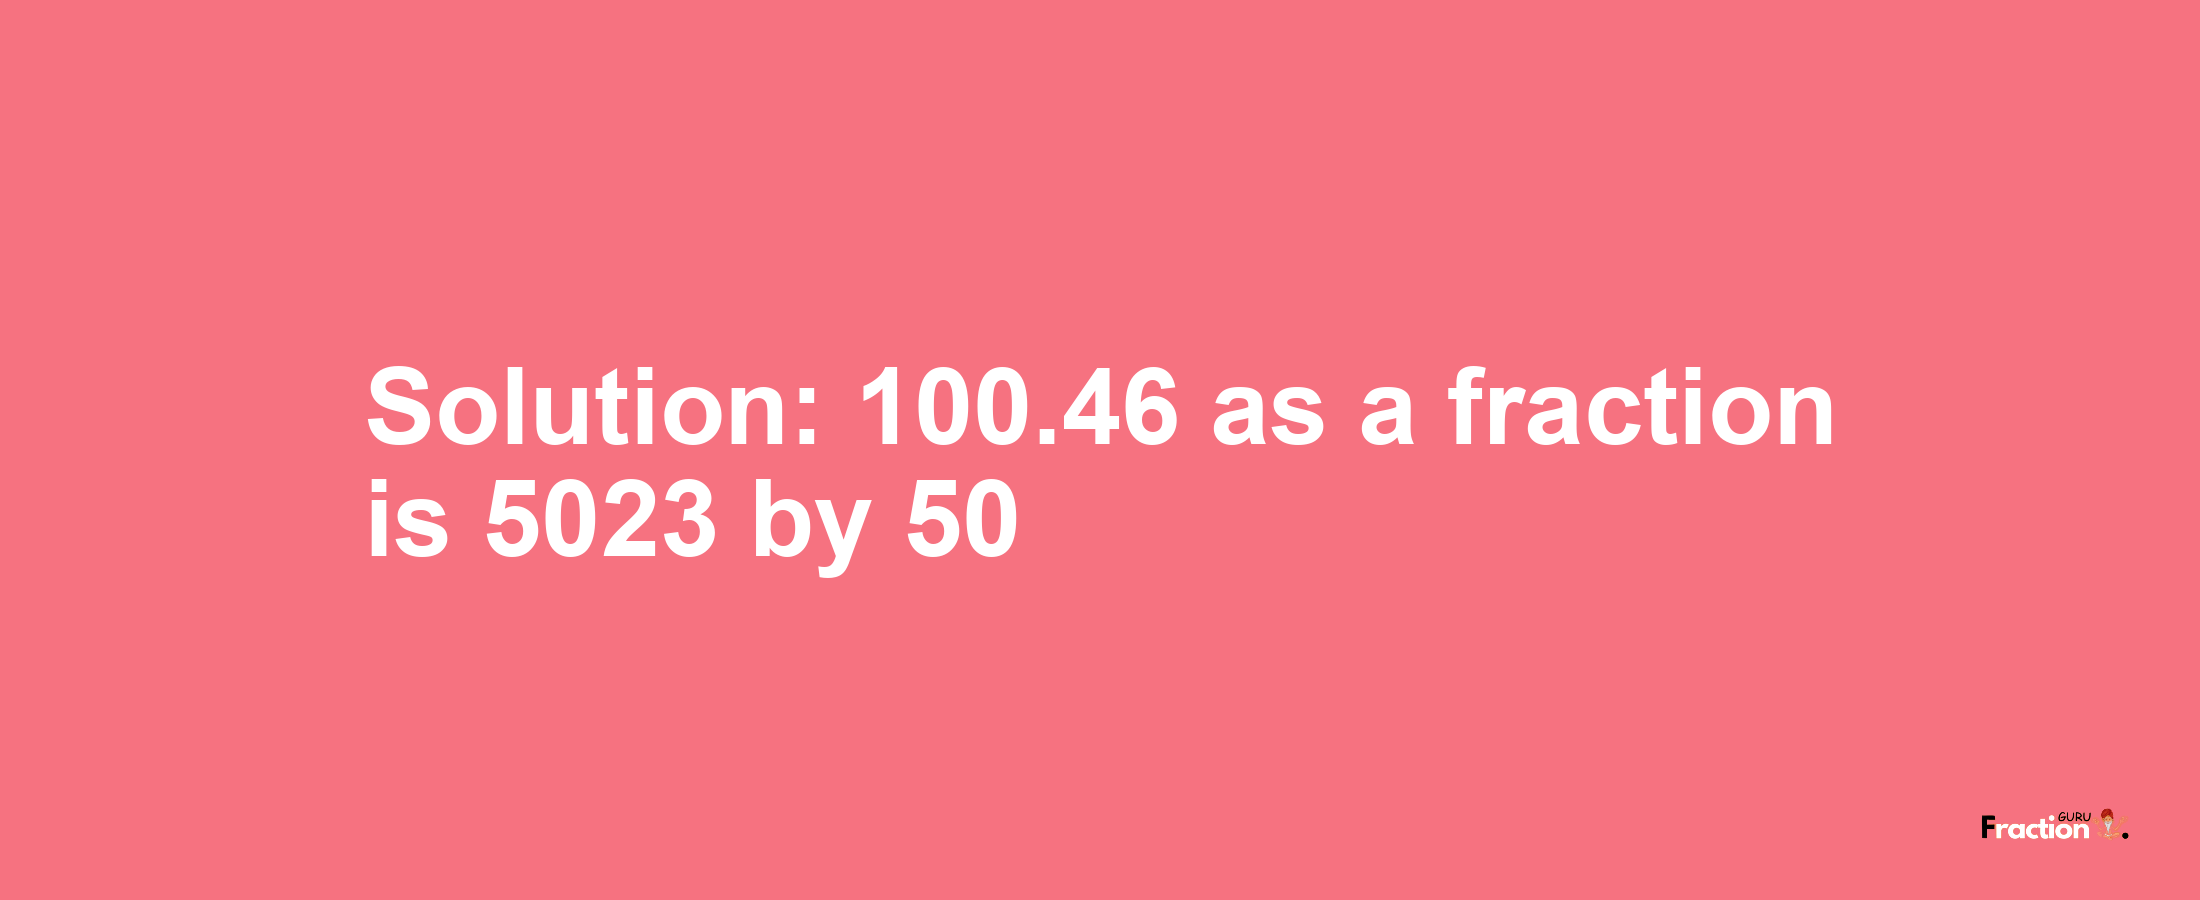 Solution:100.46 as a fraction is 5023/50